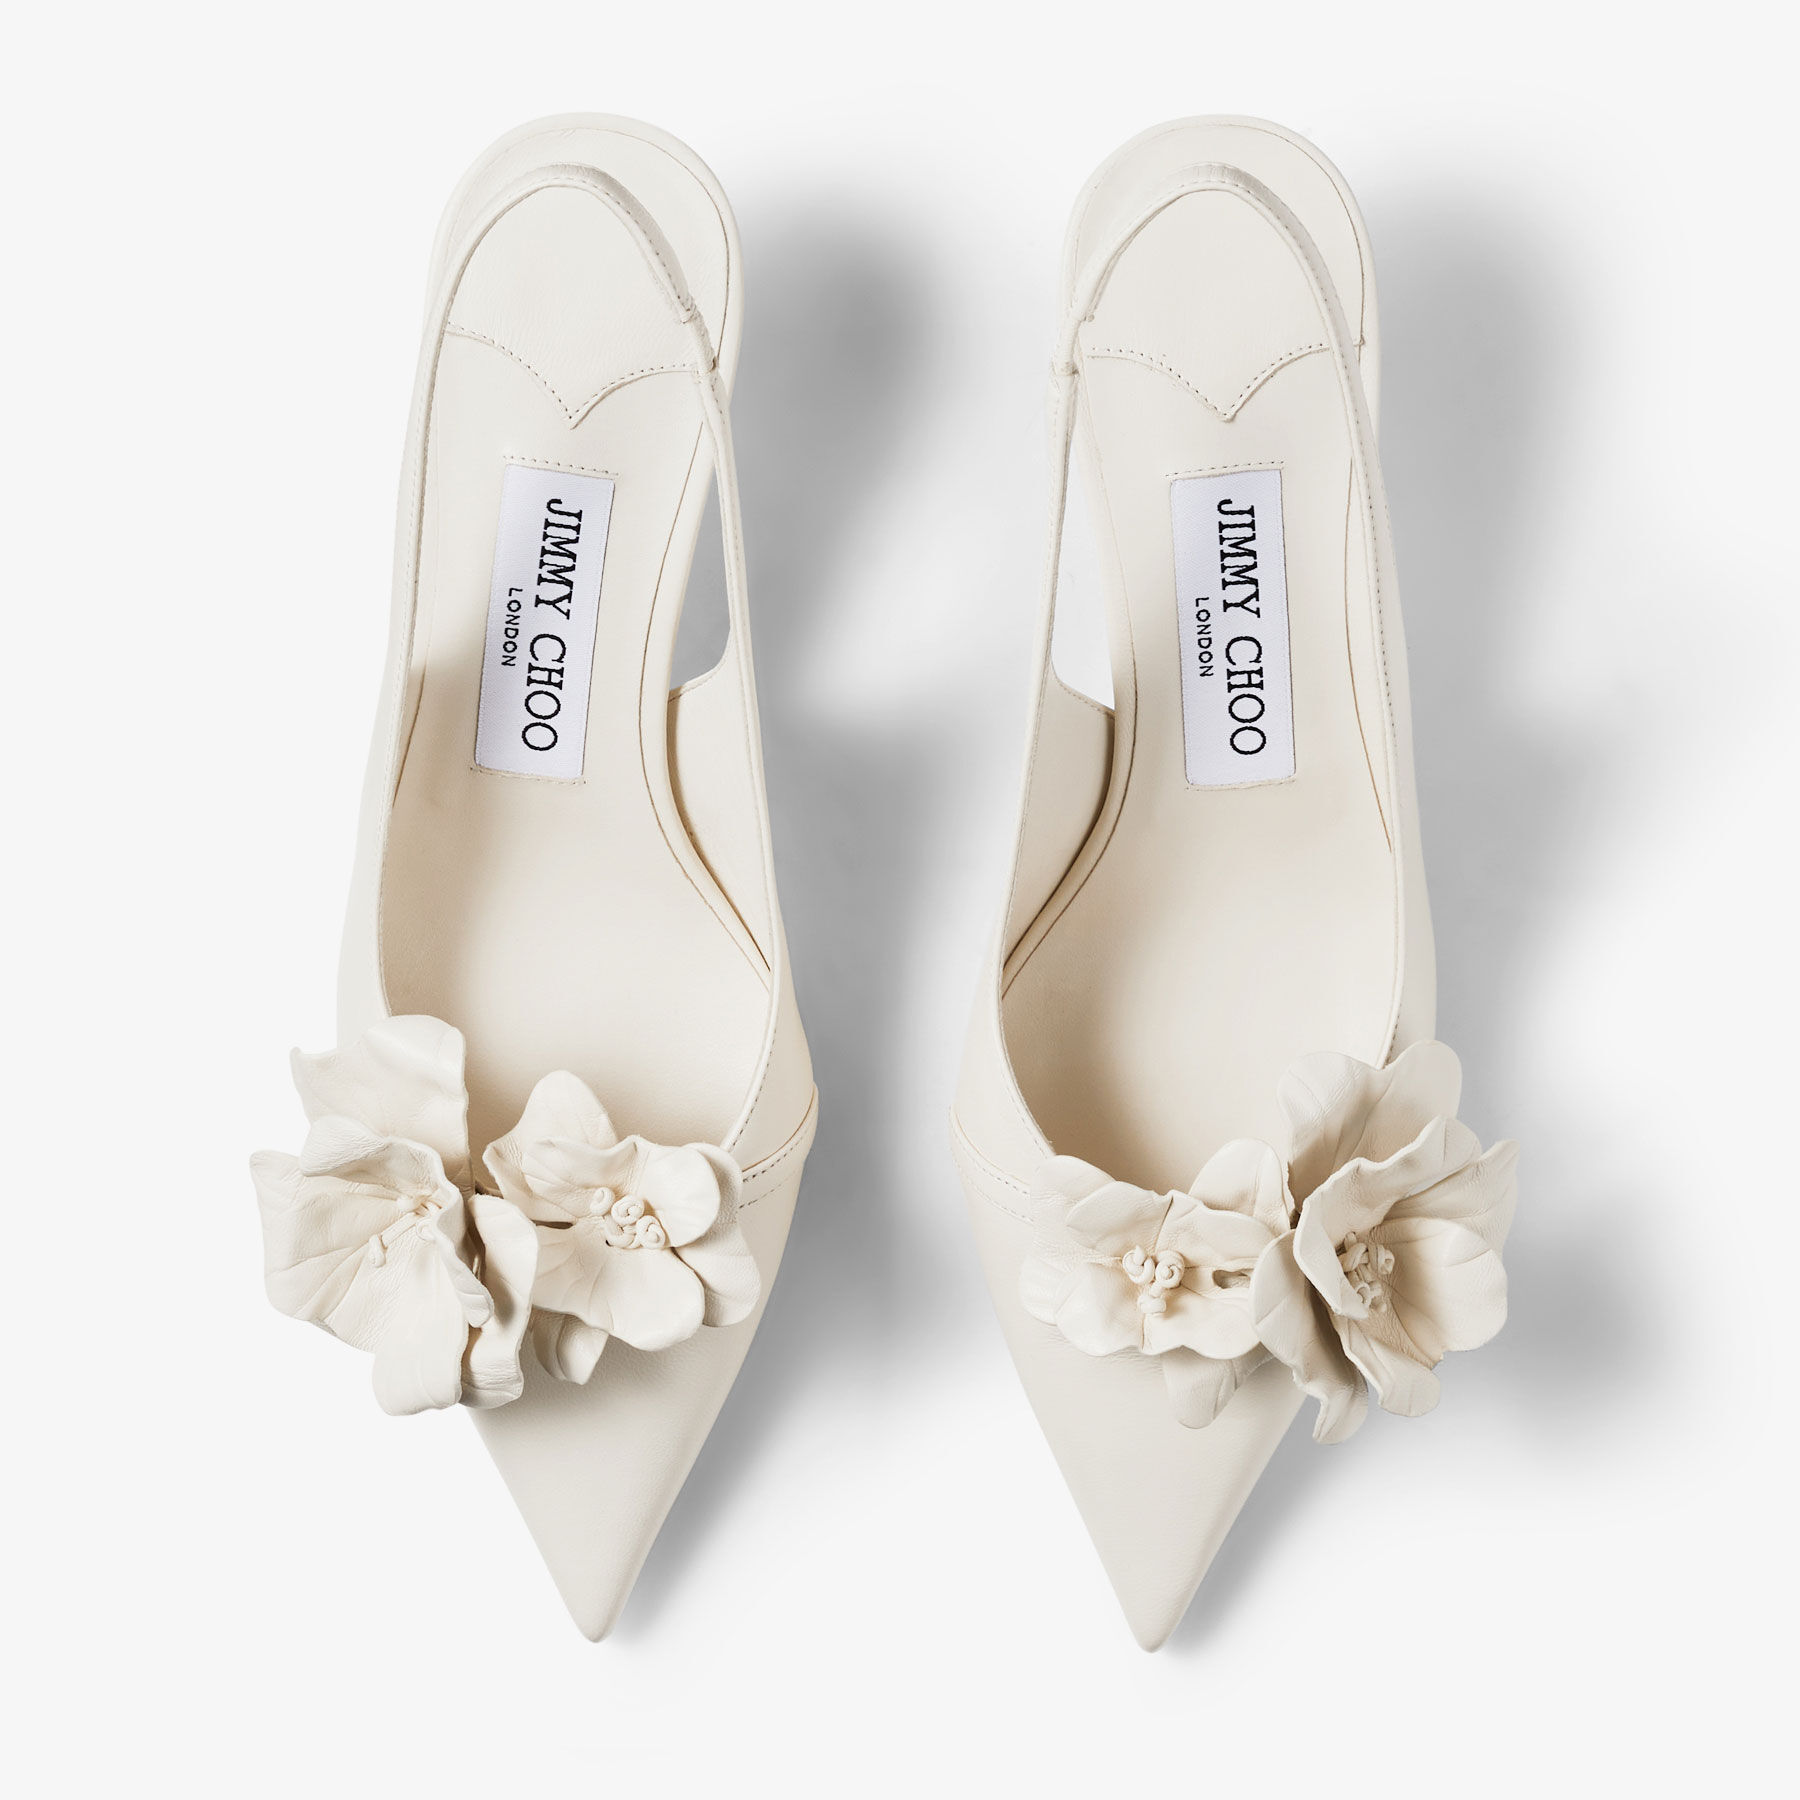 AMITA/FLOWERS 45  Latte Nappa Leather Sling Back Pumps with